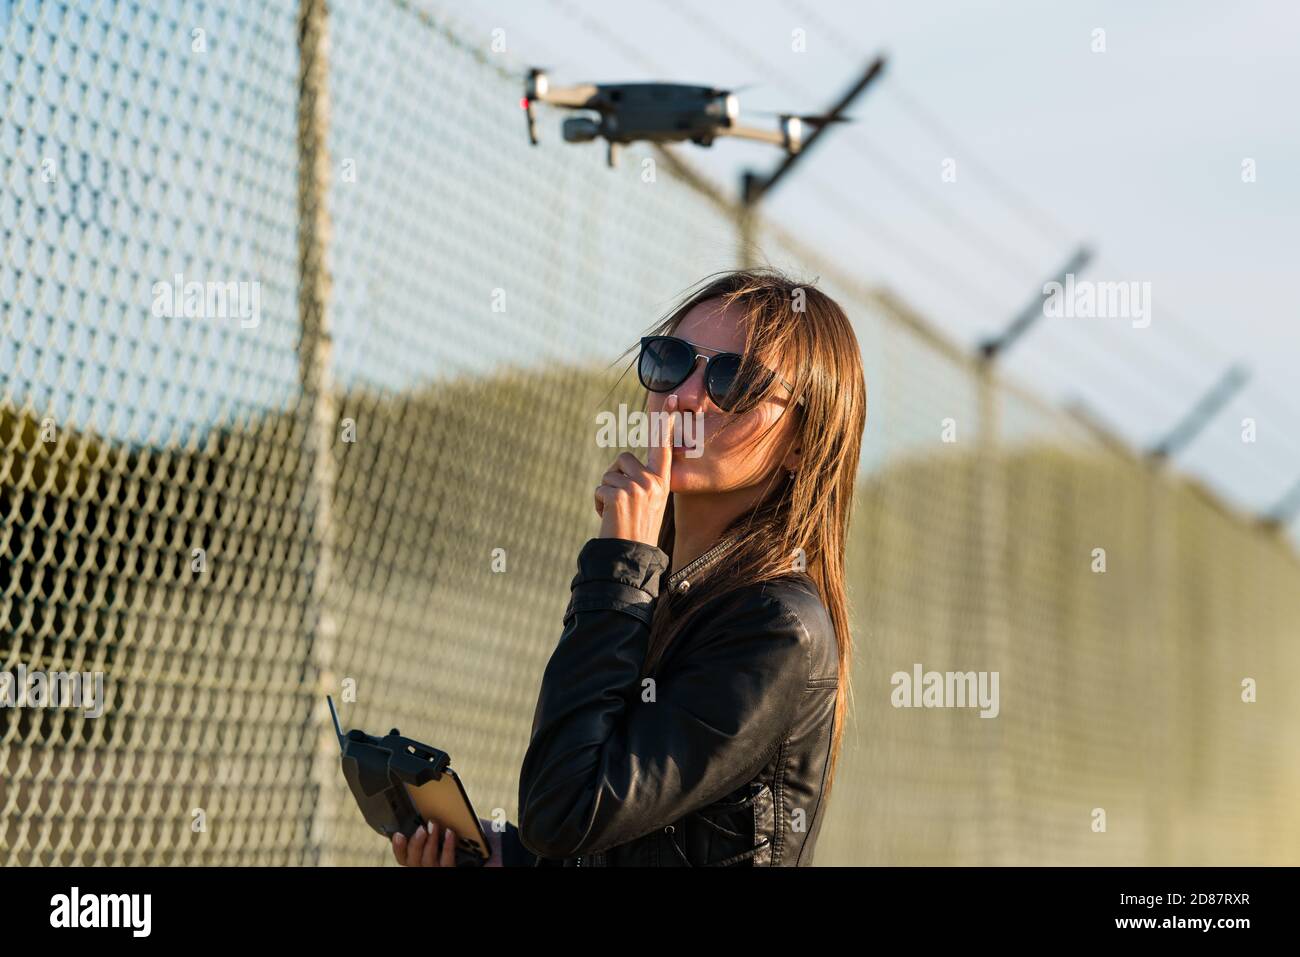 Woman flying drone in forbidden zone. Fly a drone without a license. Fly drone near airport. Drone legislation Stock Photo